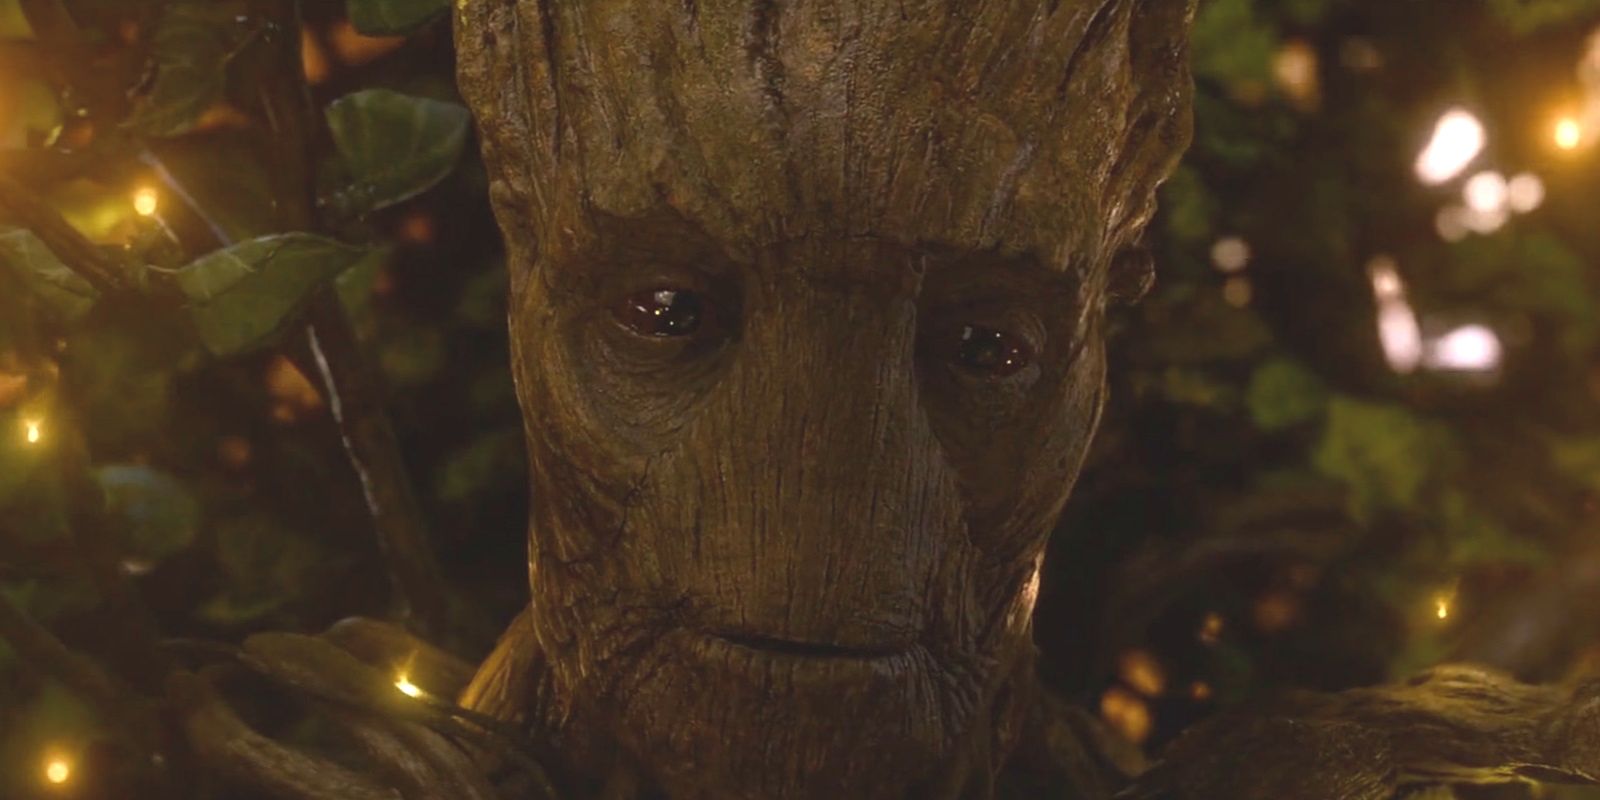 Groot before his sacrifice in Guardians of the Galaxy